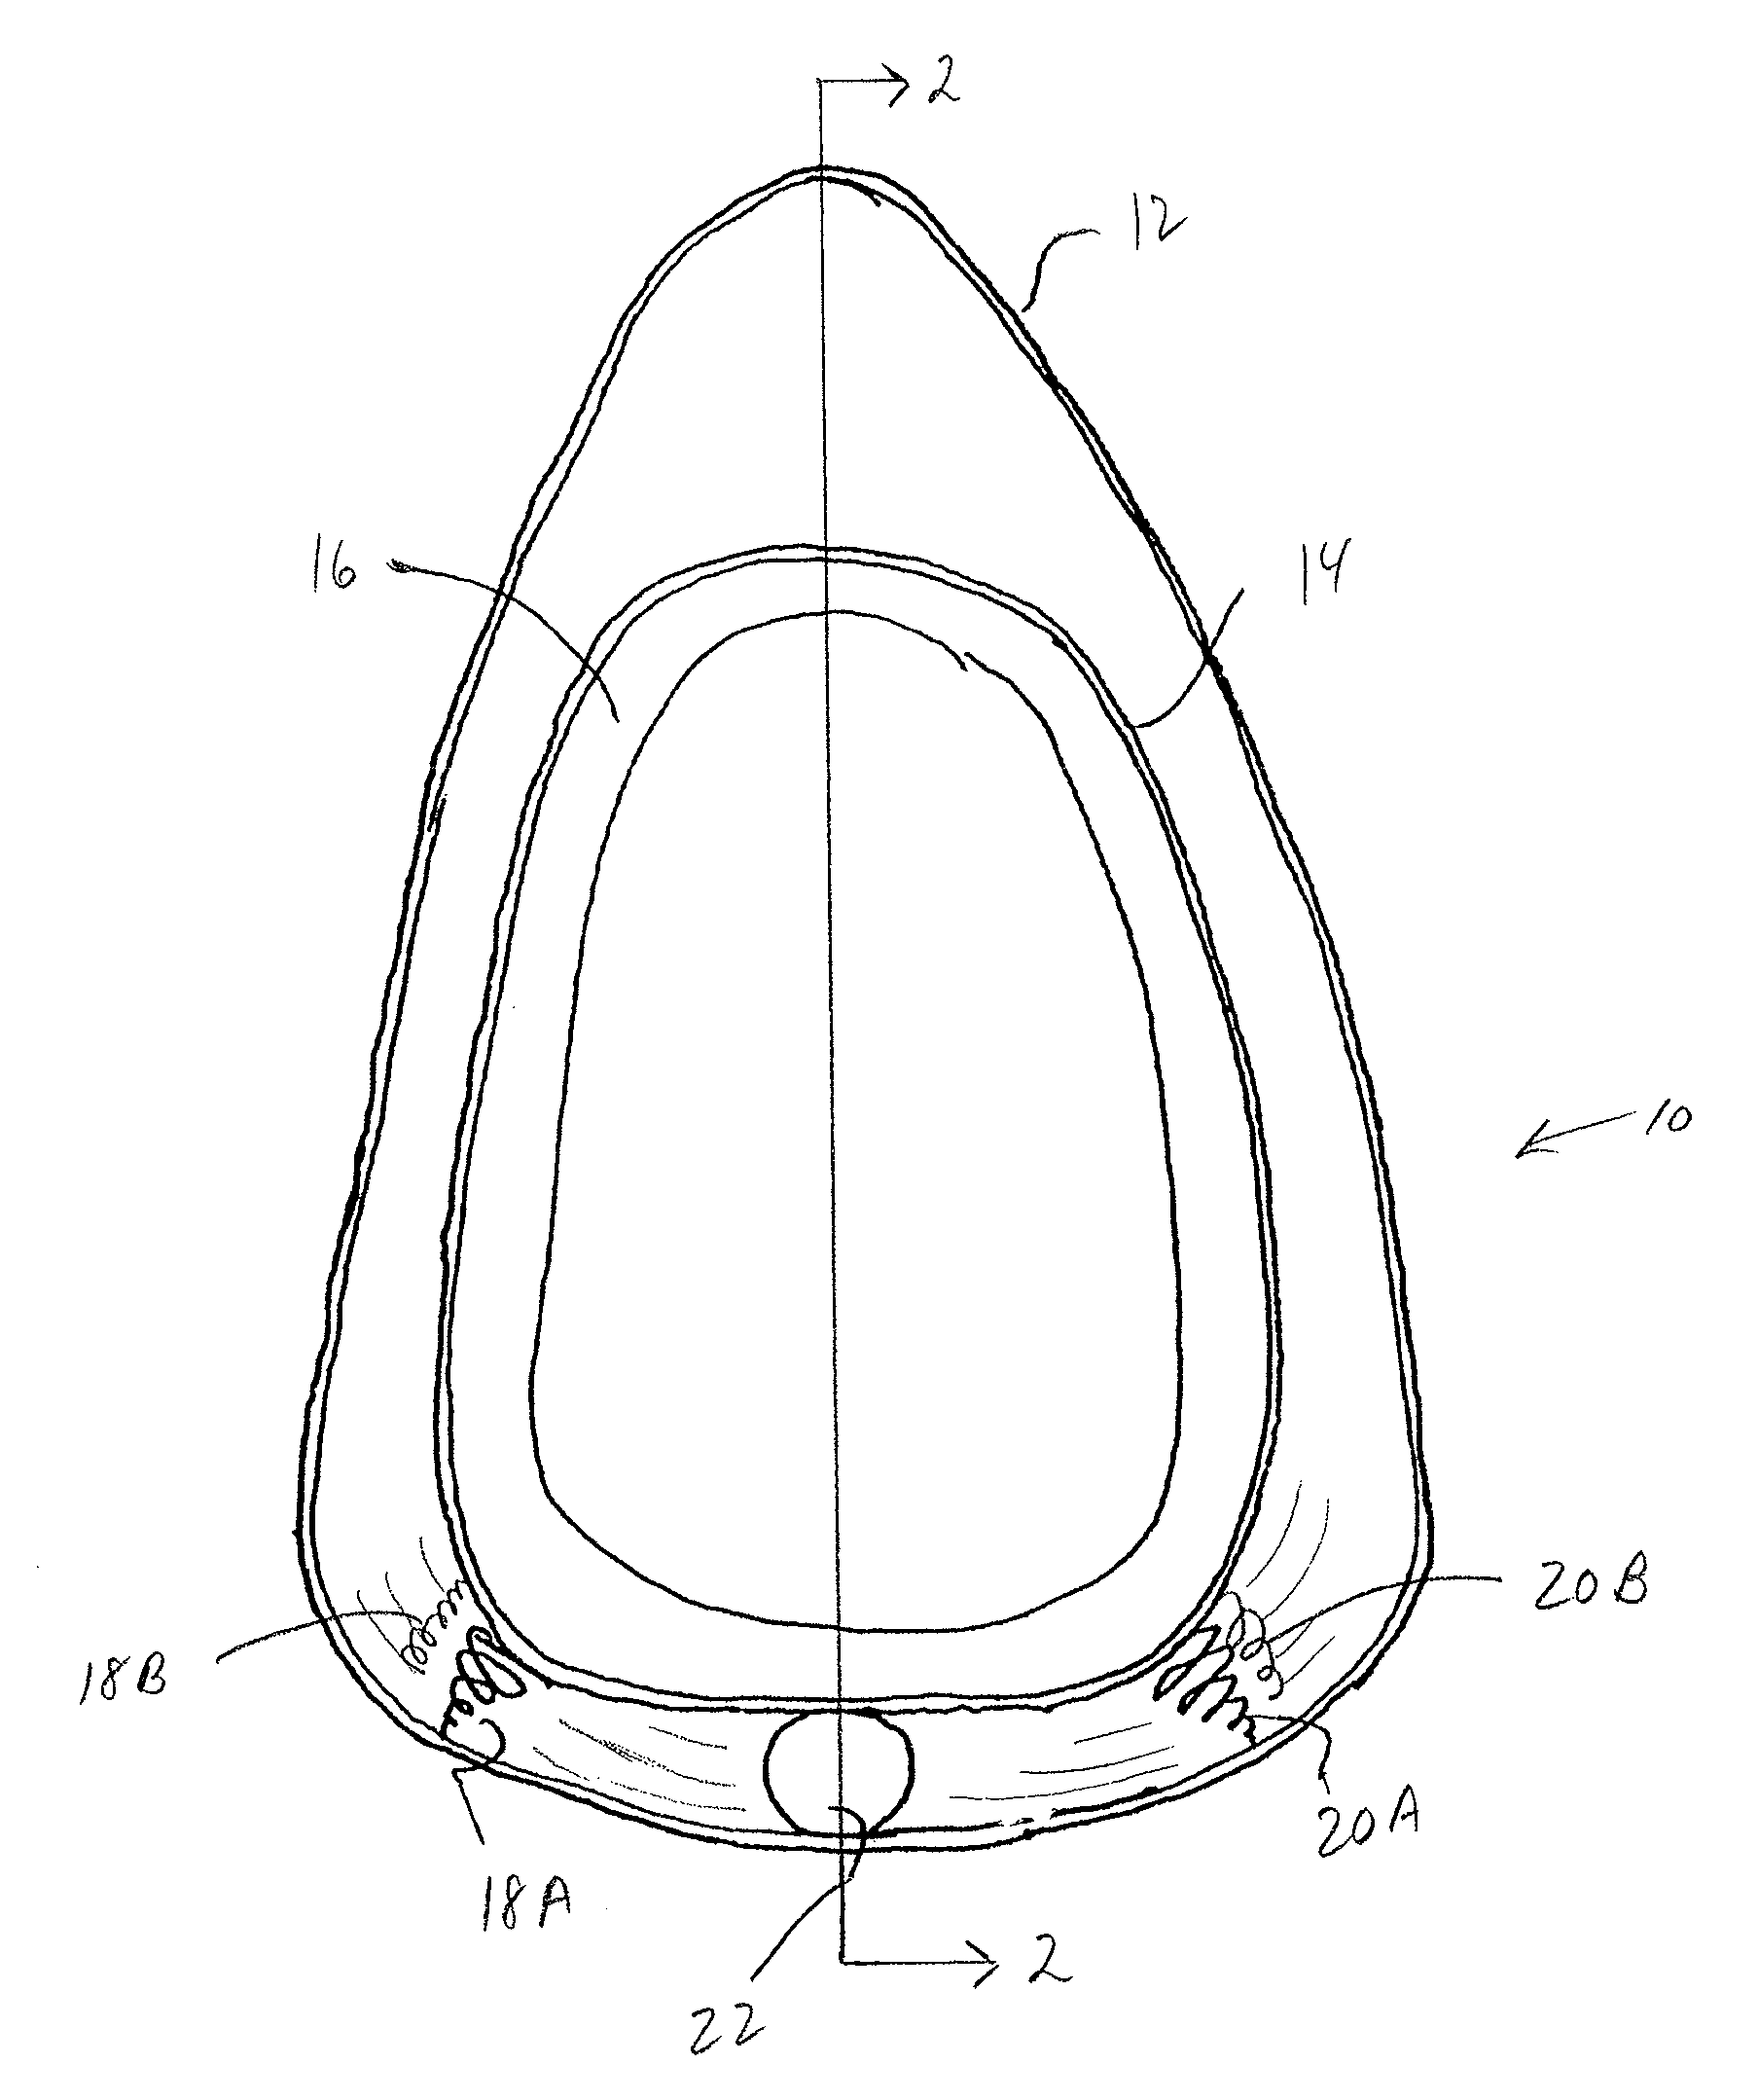 Energy dissipation system for a helmet